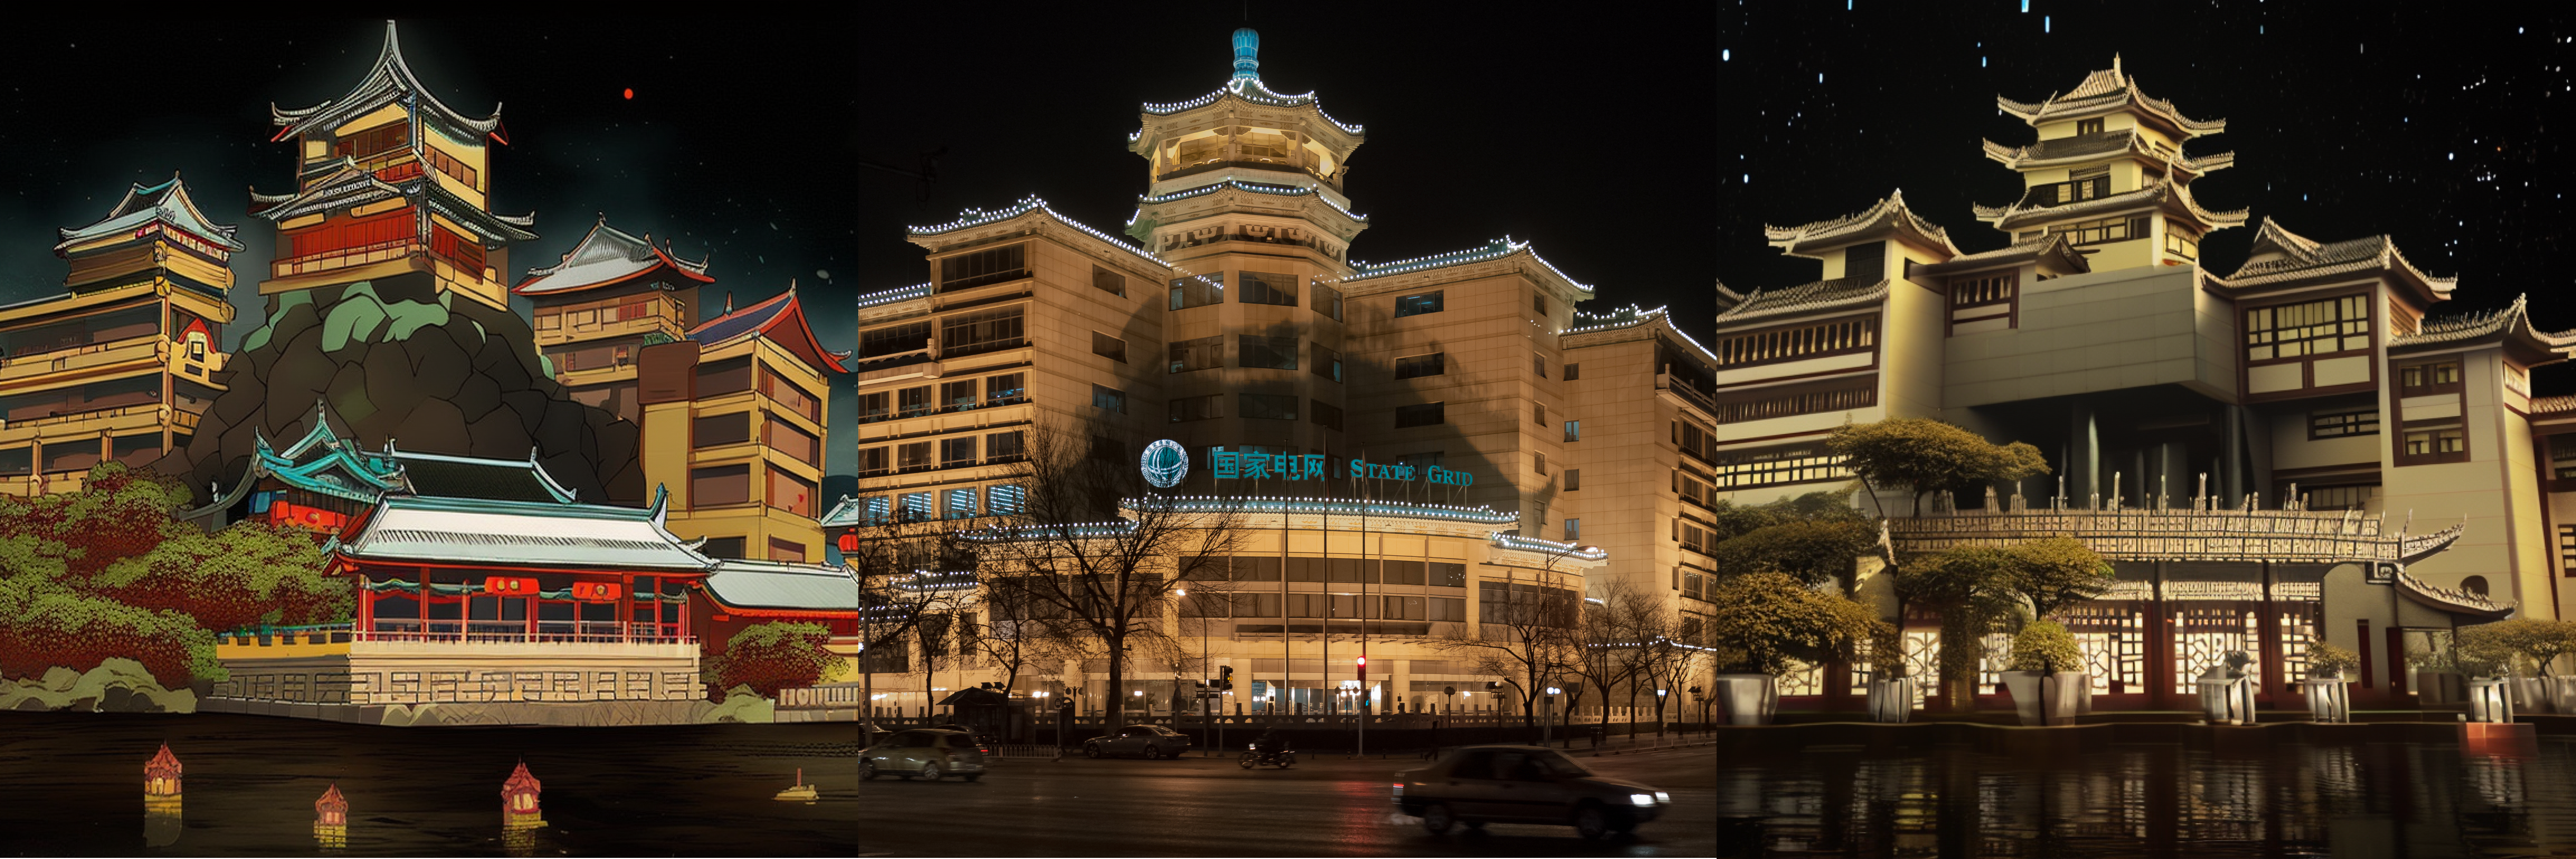 State Grid HQ in Xi Cheng